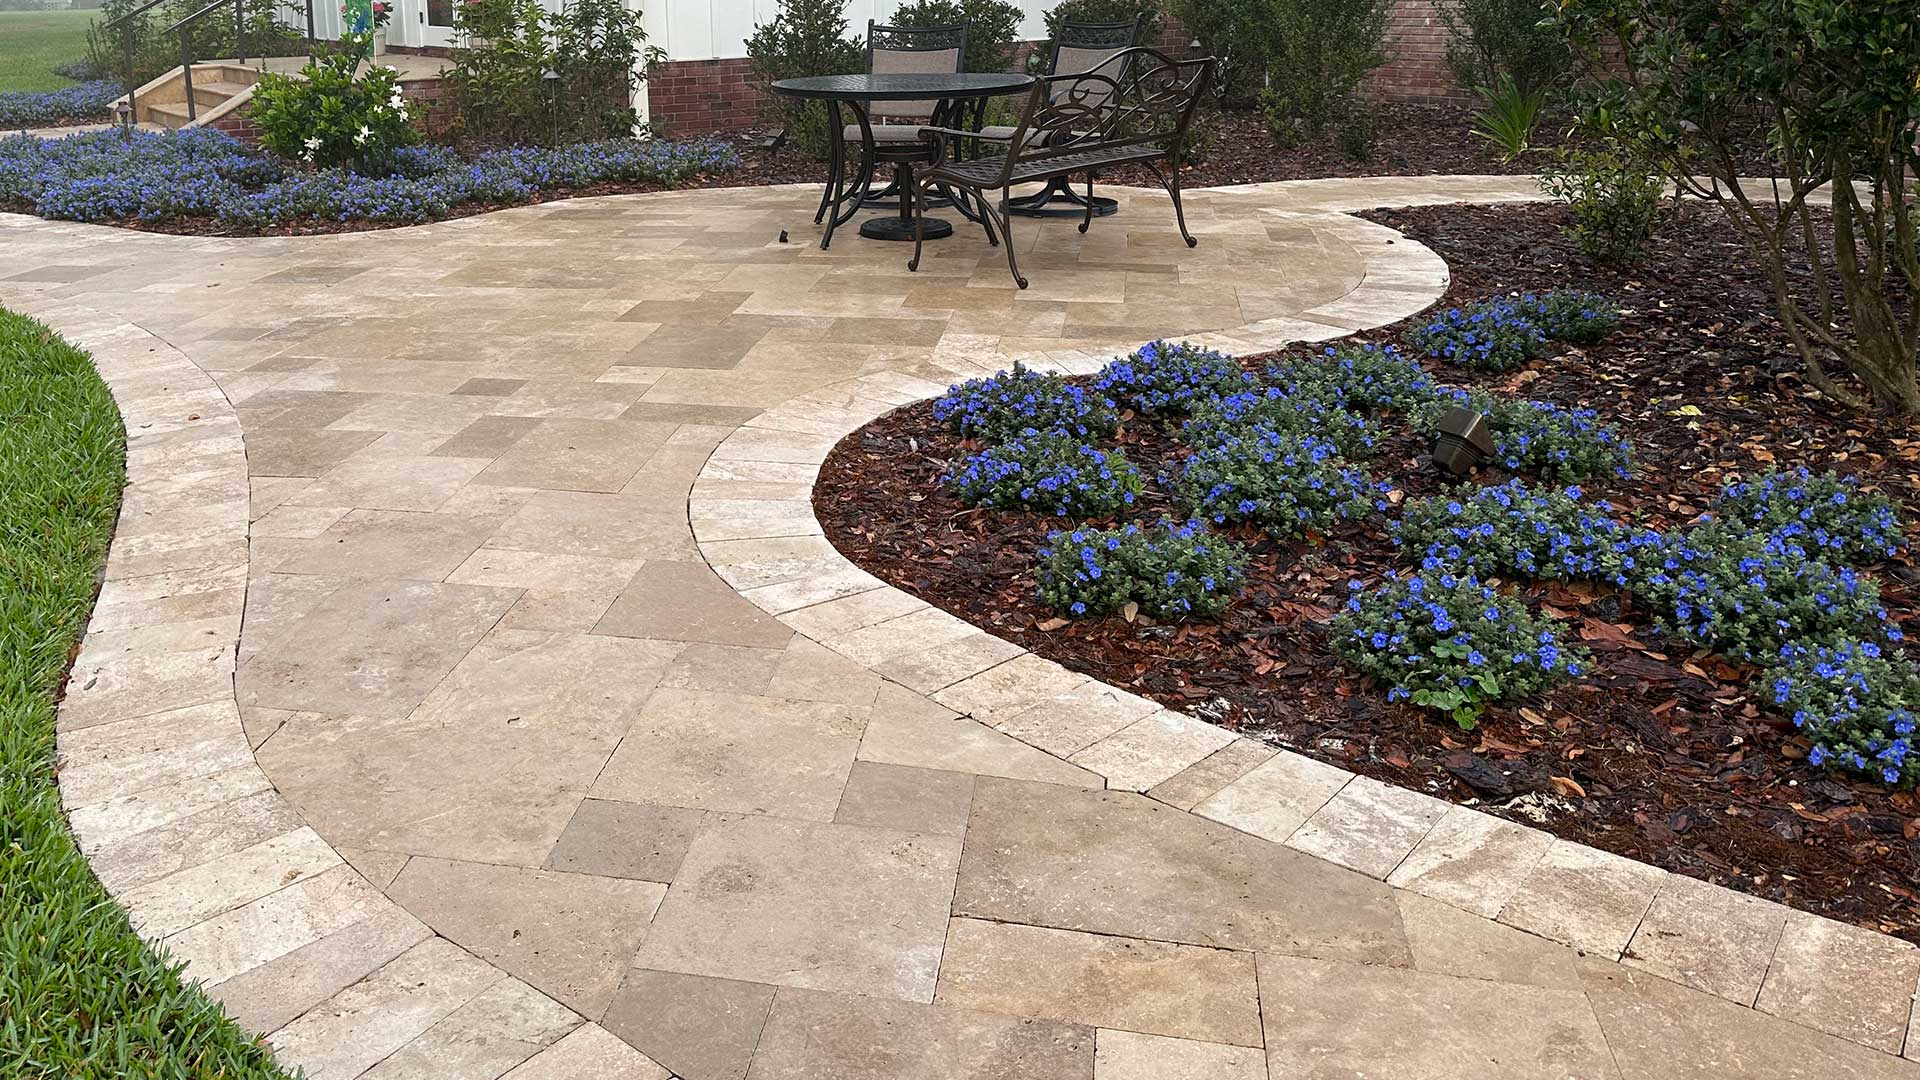 Patio paver and walkway with new landscaping at a home in Bartow, FL.